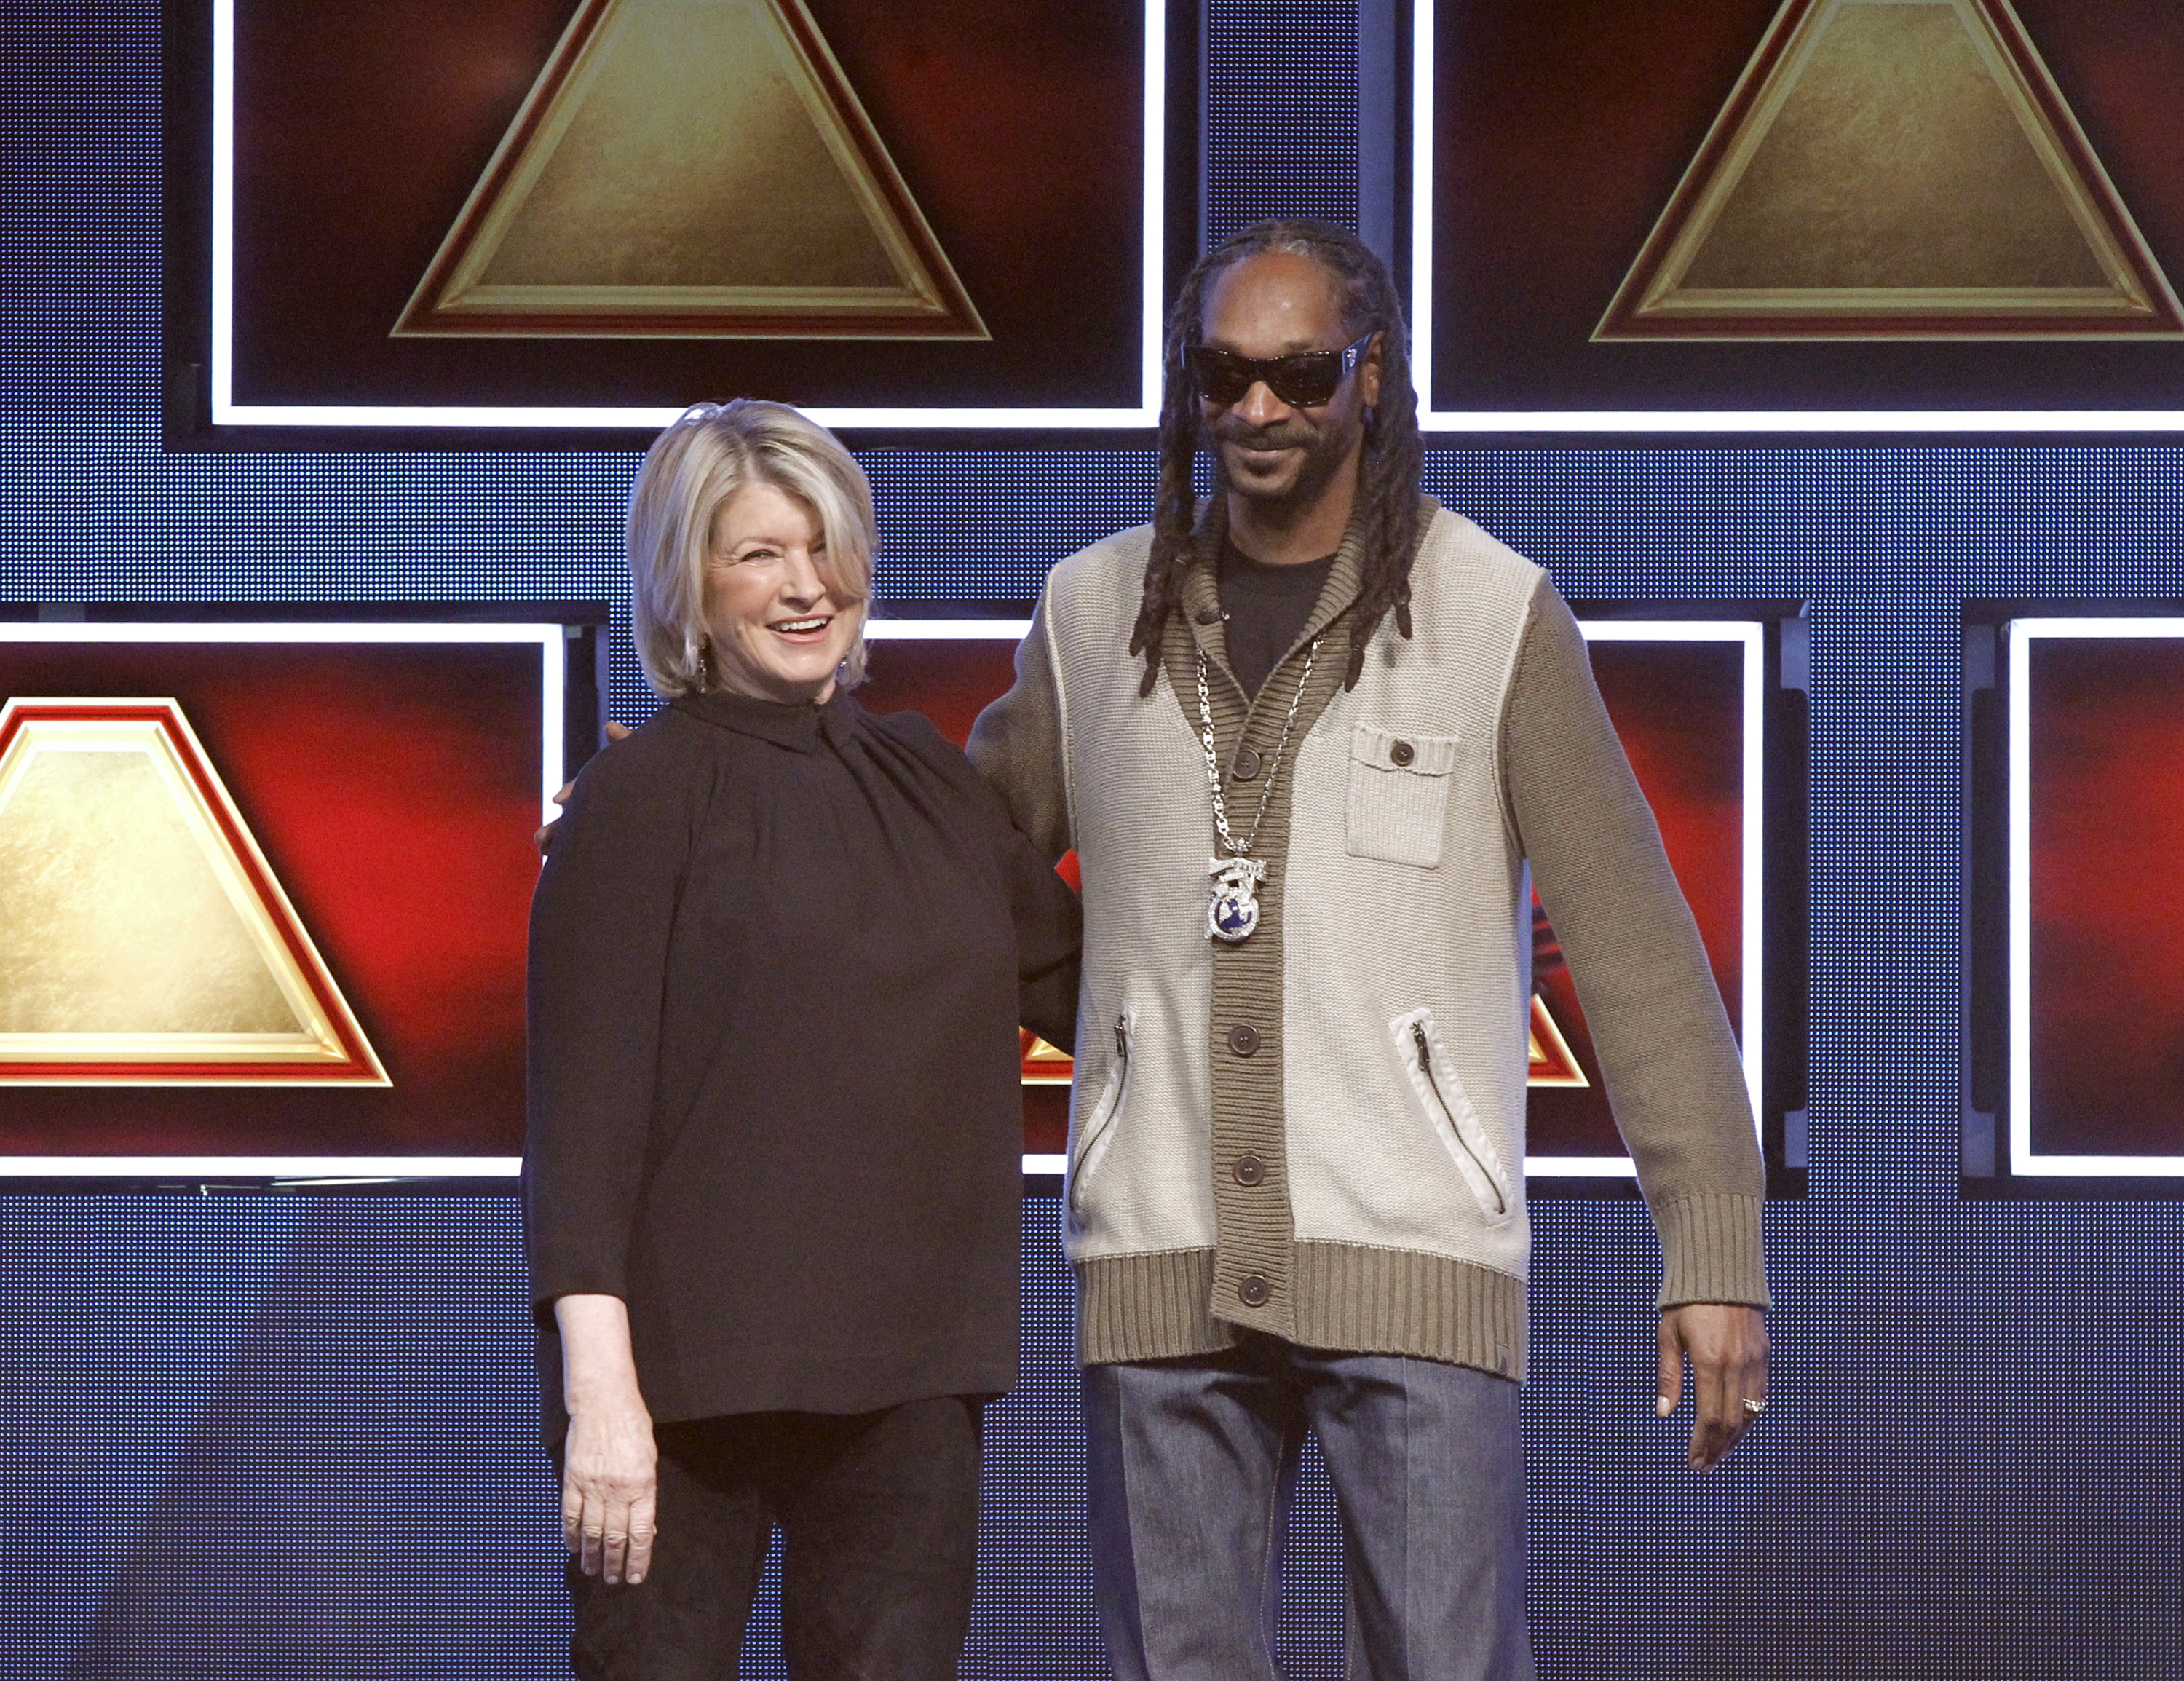 Martha Stewart and Snoop Dogg compete for prizes on a recent ABC game show. (Lou Rocco&mdash;Getty Images)